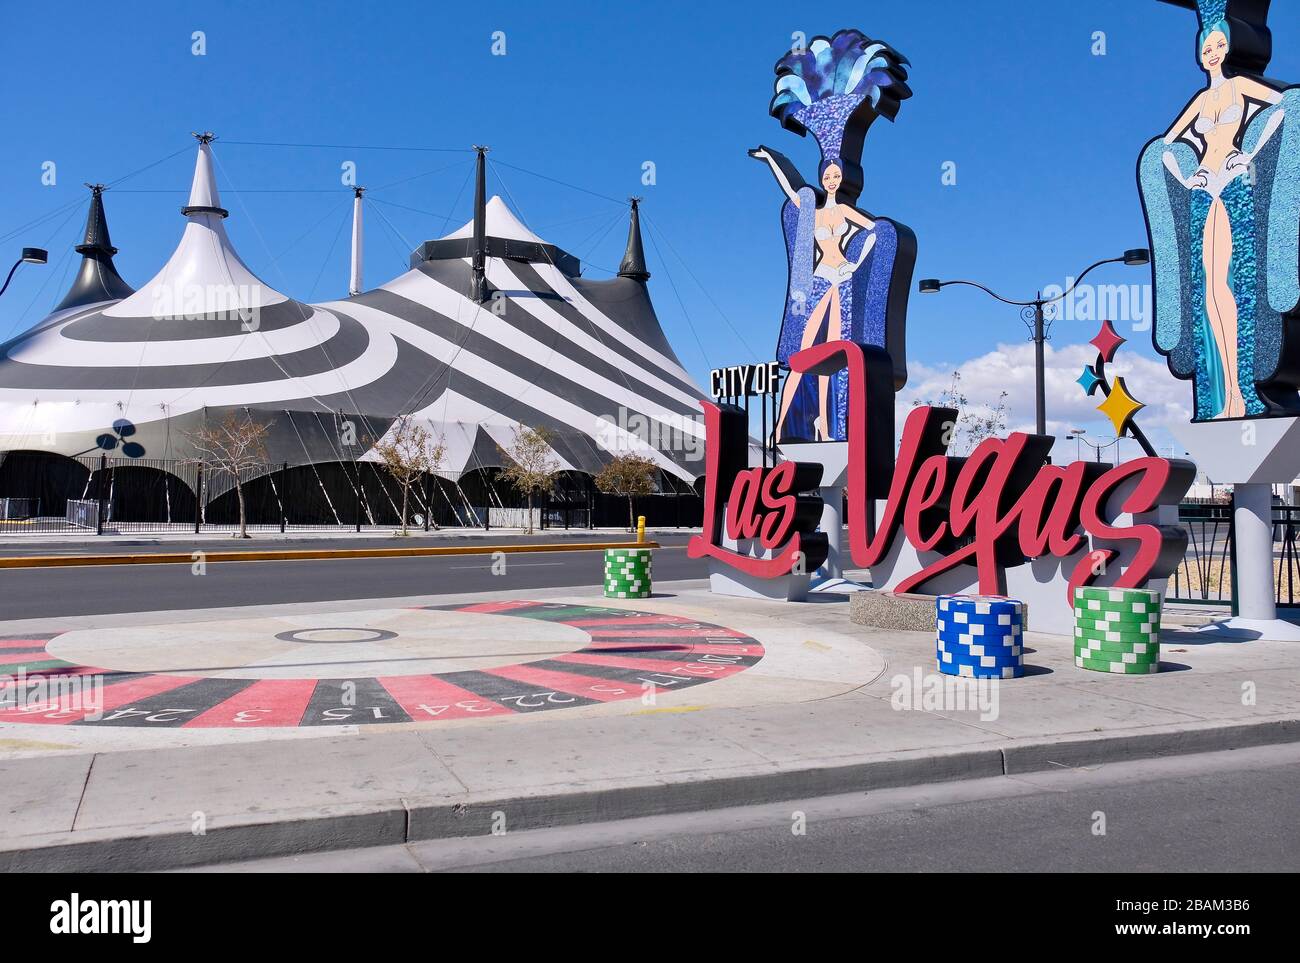 A large tent, venue for a Las Vegas show called 'Celestia,' remains empty during Nevada's COVID-19 related shutdown of nonessential businesses Stock Photo